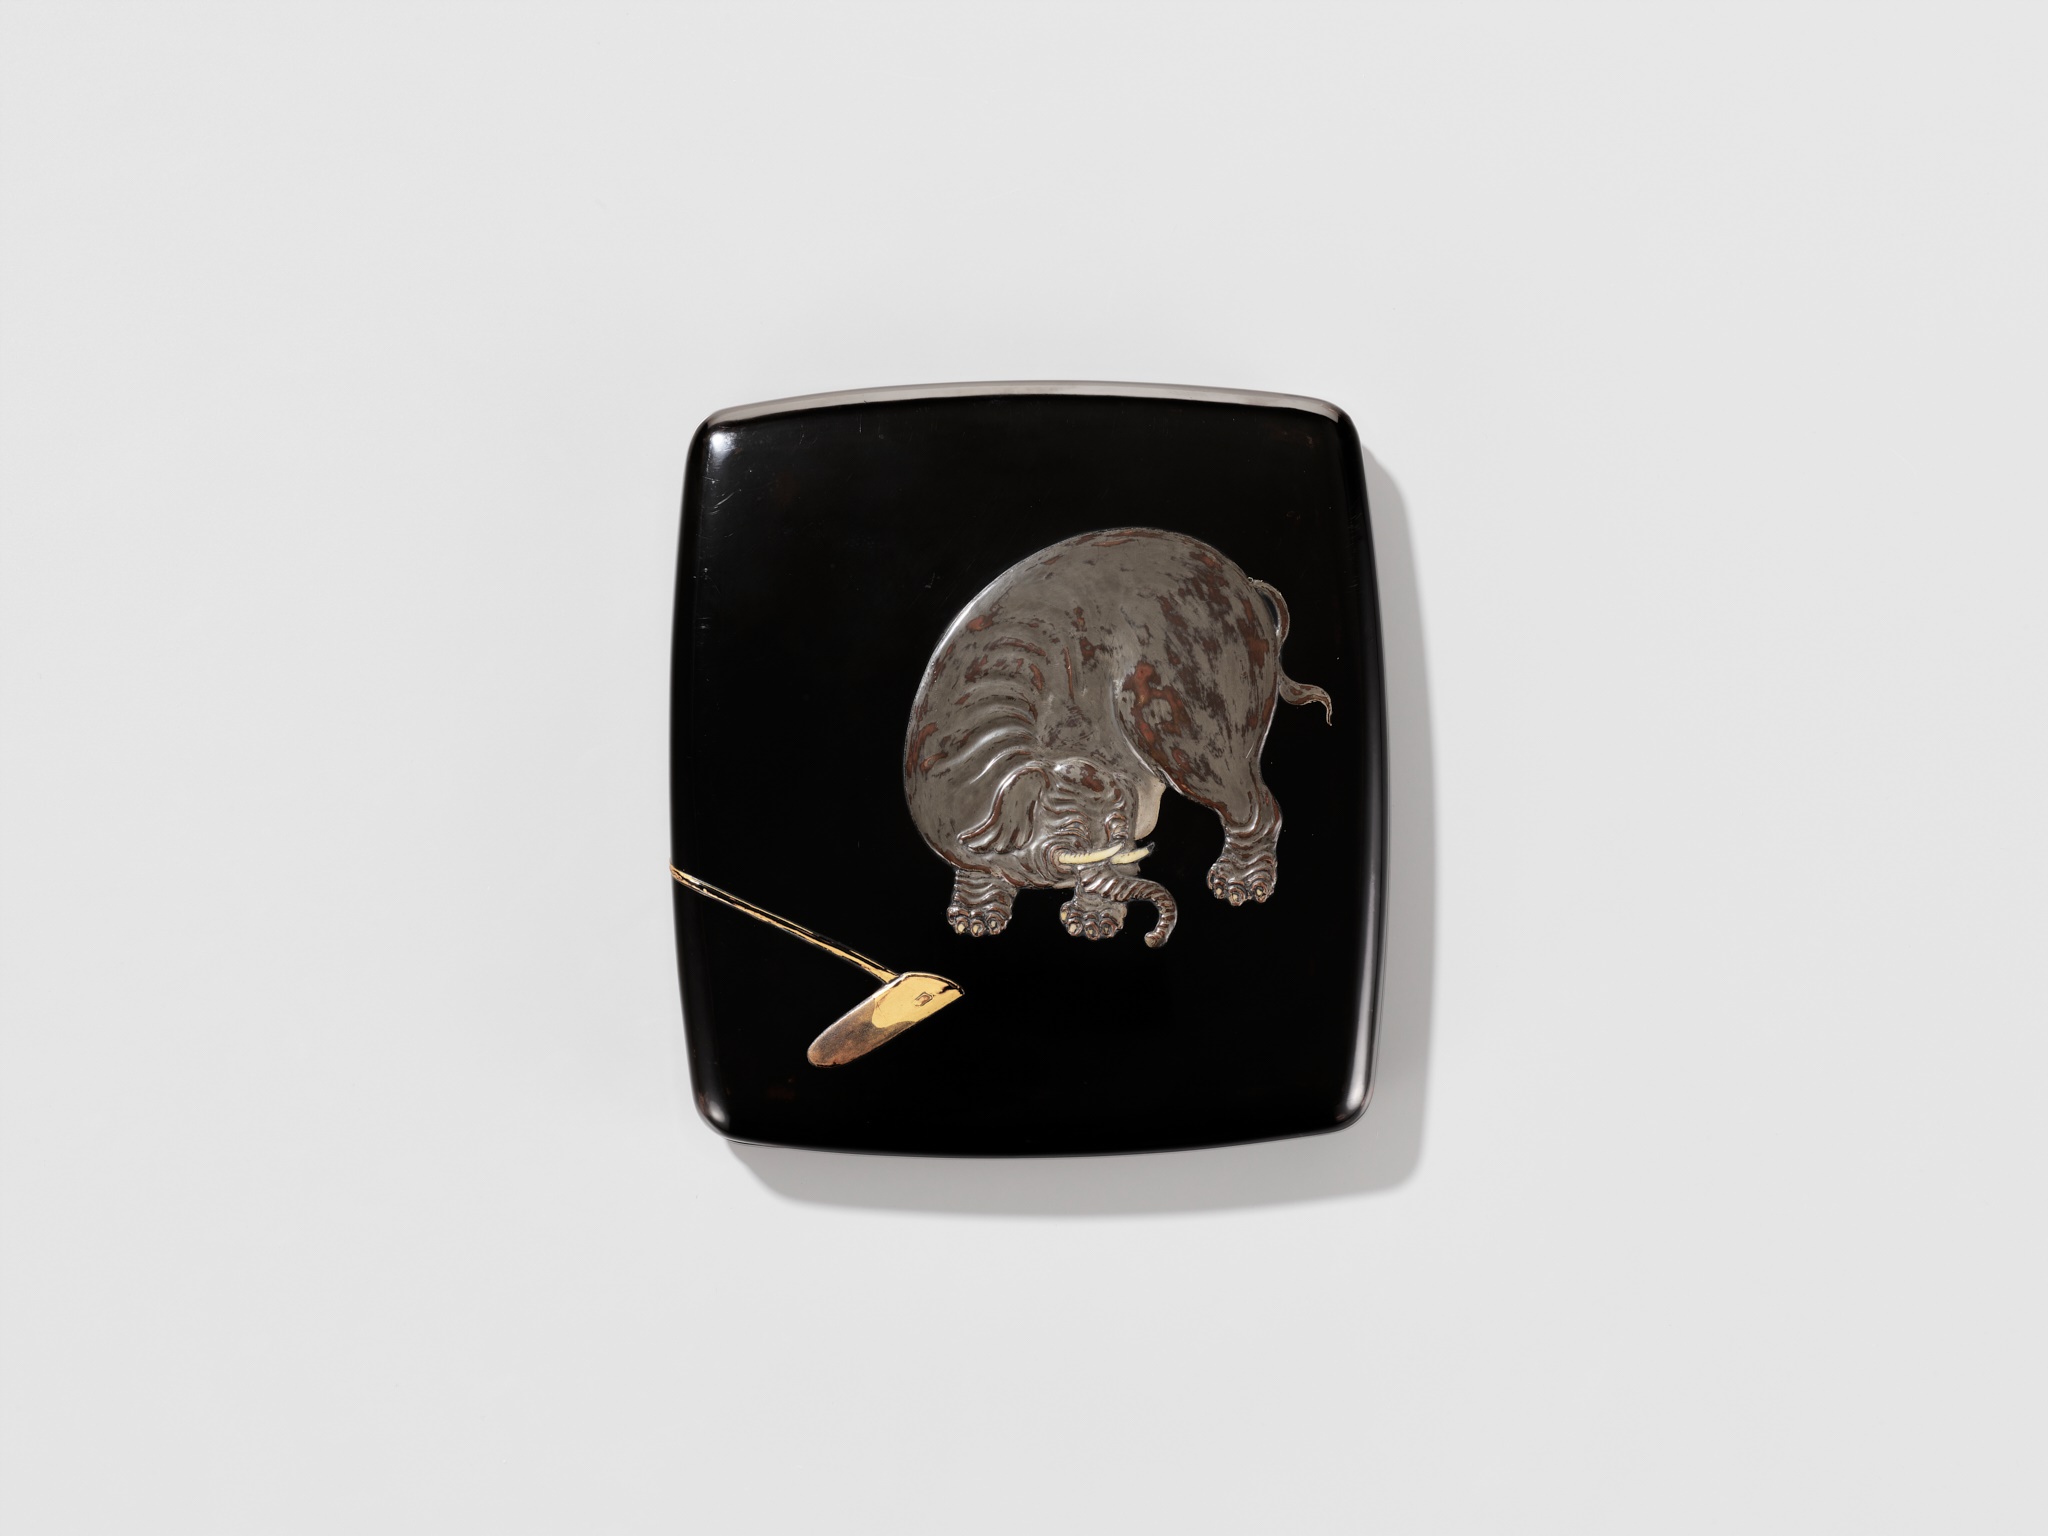 A SUPERB RITSUO-SCHOOL LACQUER AND CERAMIC-INLAID SUZURIBAKO DEPICTING AN ELEPHANT - Image 5 of 9